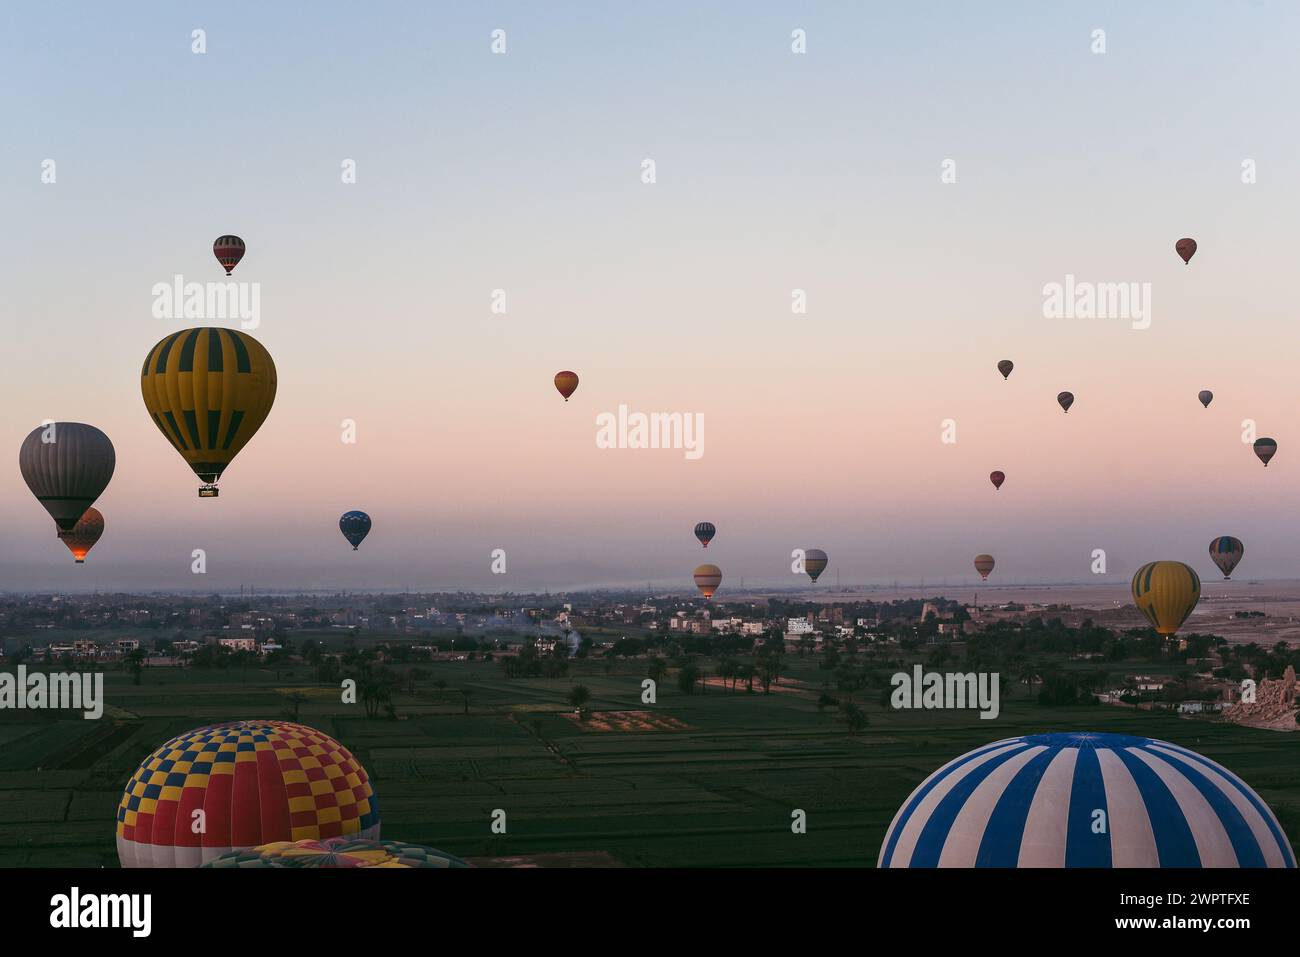 Wide view of dozens of hot air balloons flying around Luxor, Egypt Stock Photo